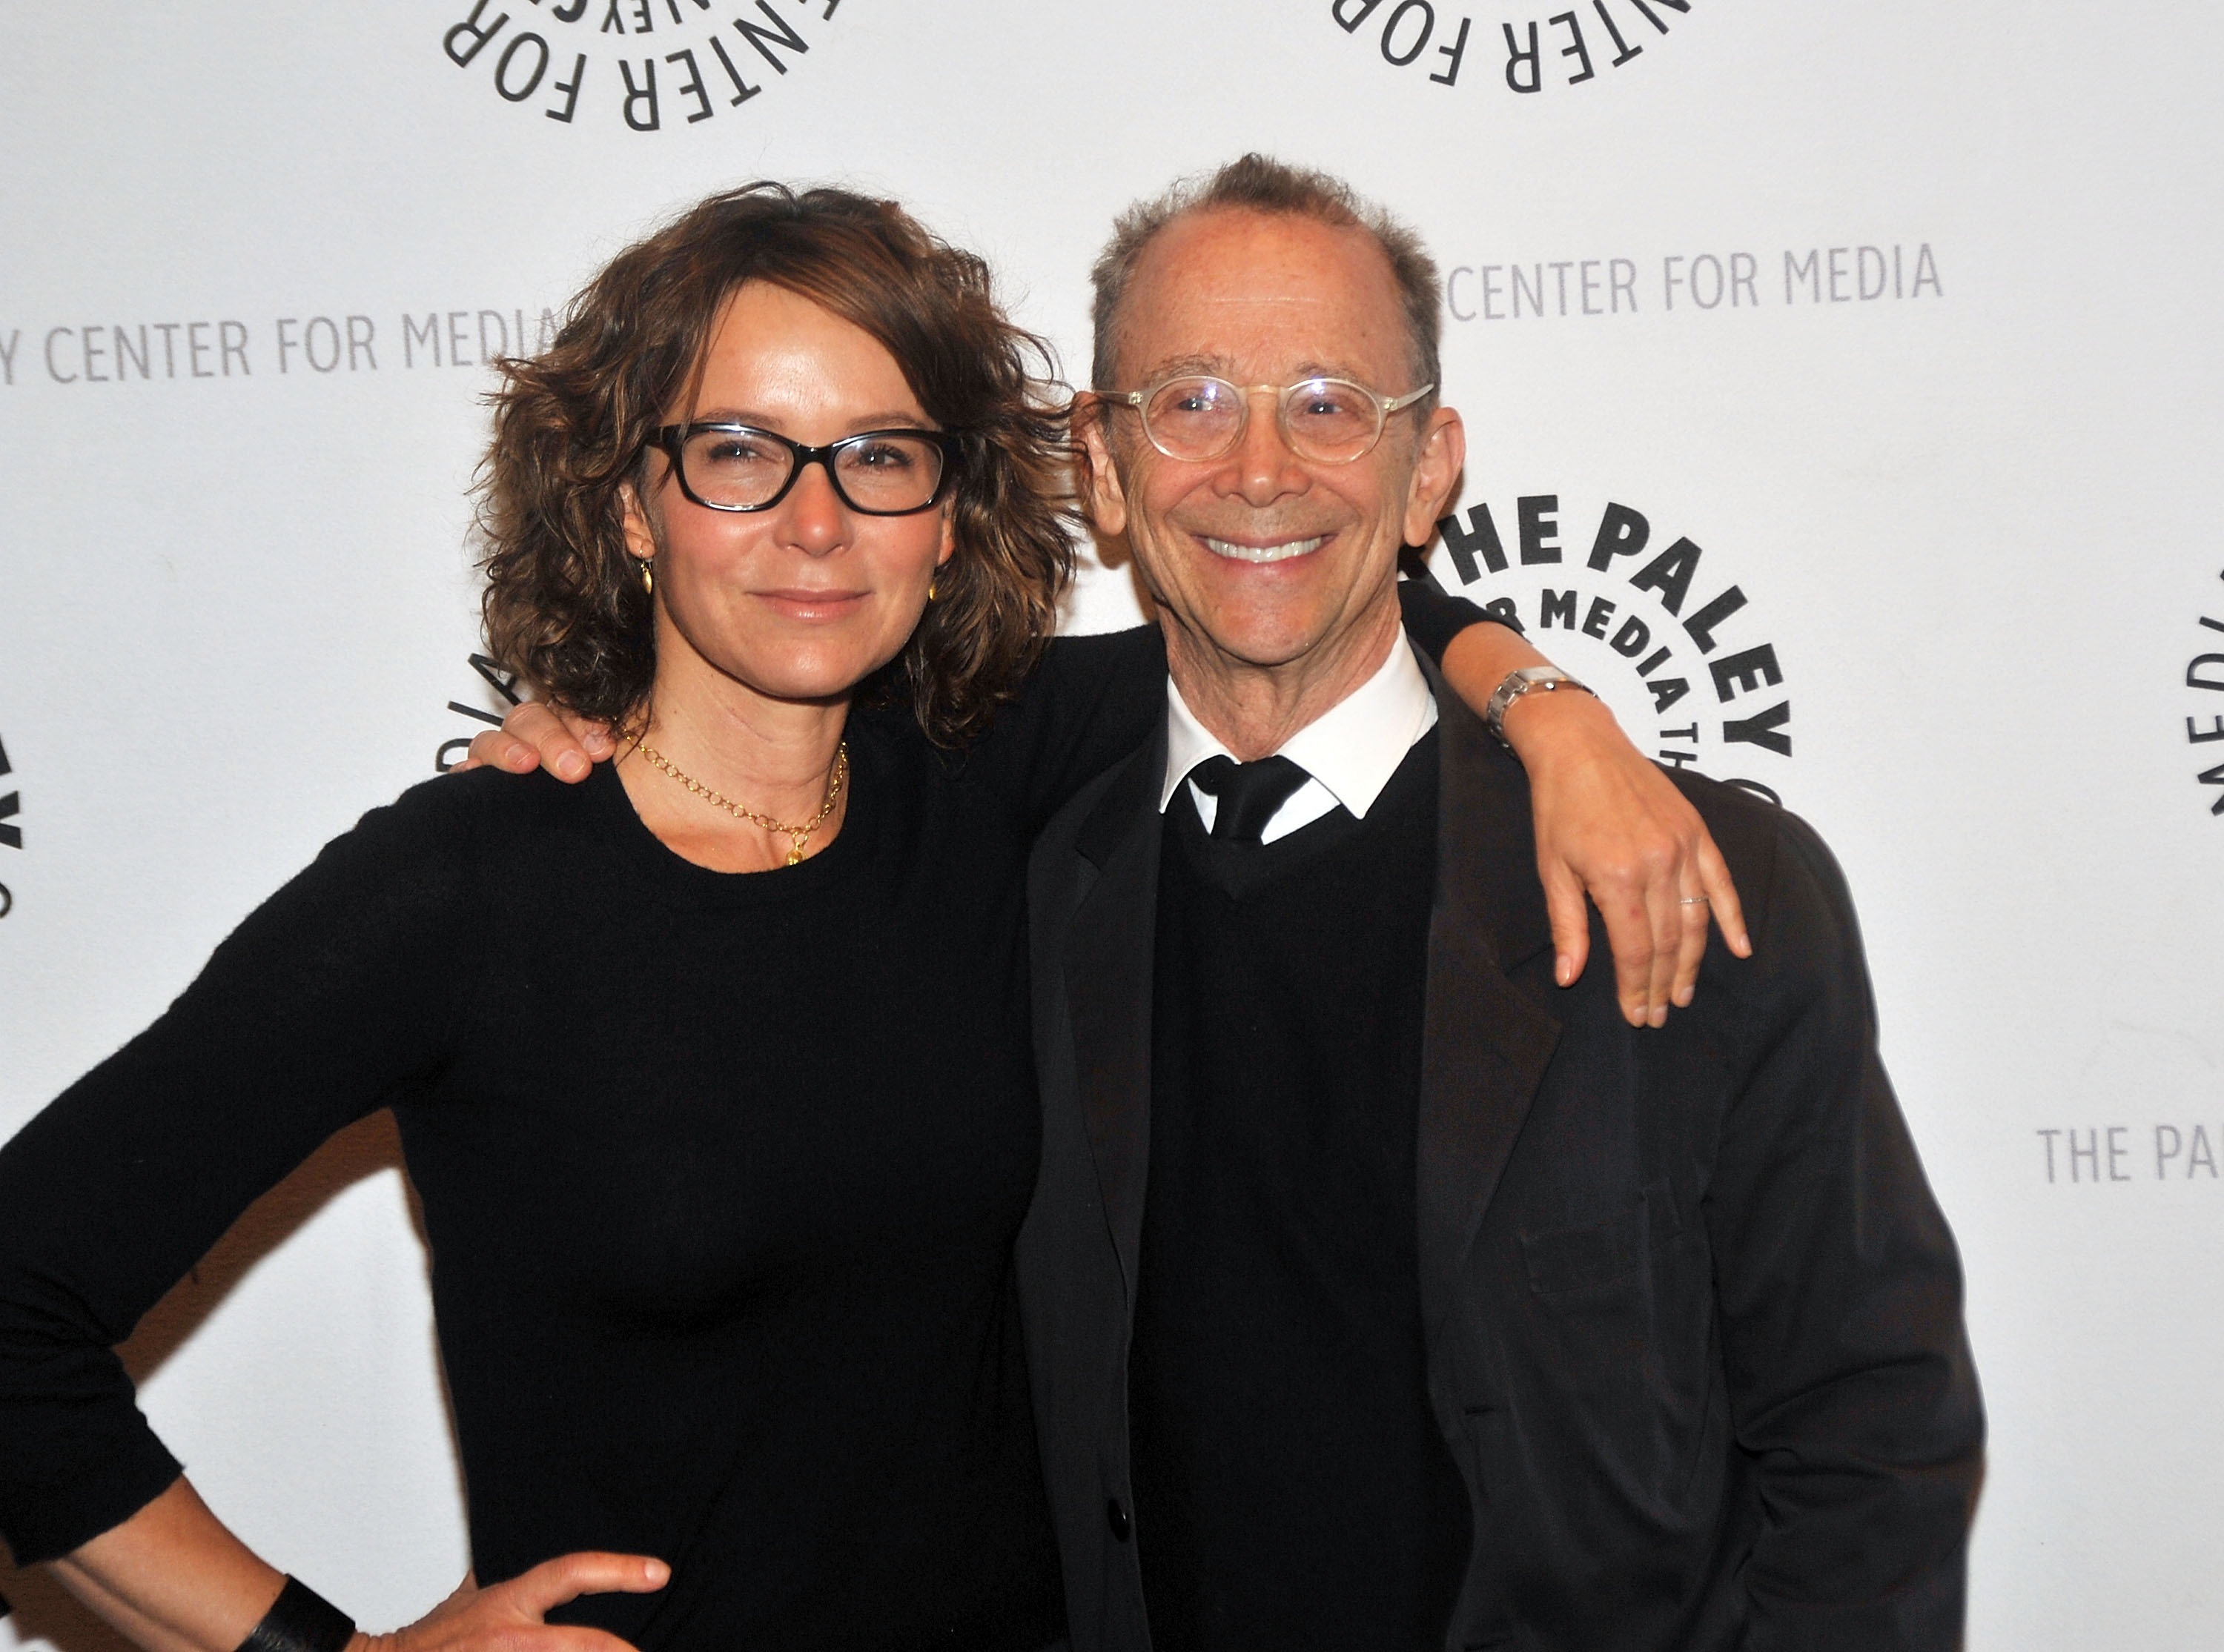 Jennifer and Joel Grey at The Paley Center for Media in New York City, 2010 | Source: Getty Images